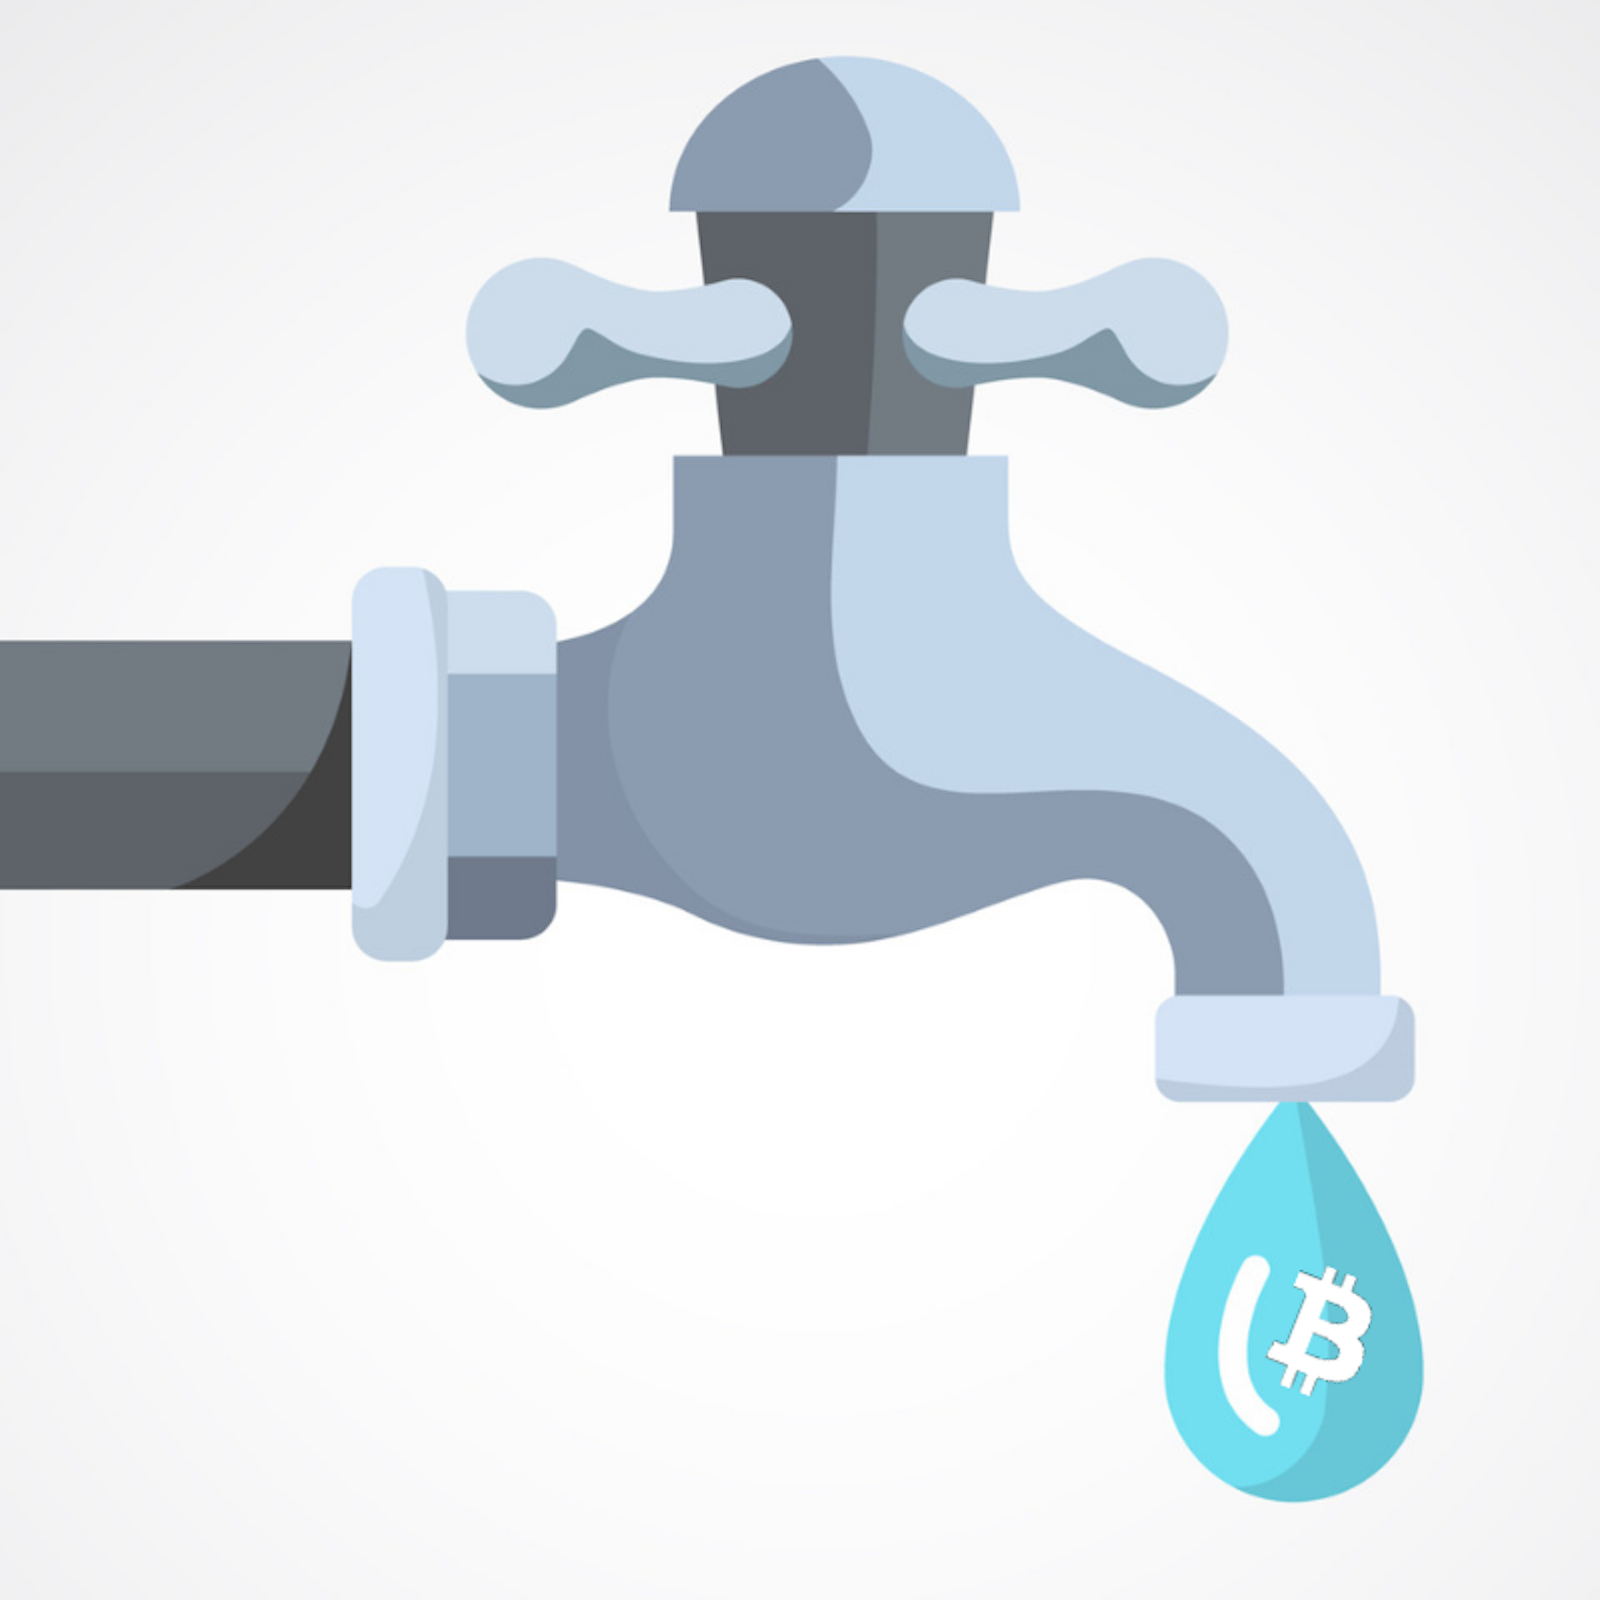 Bitcoin History Part 3: Turning on the Faucet